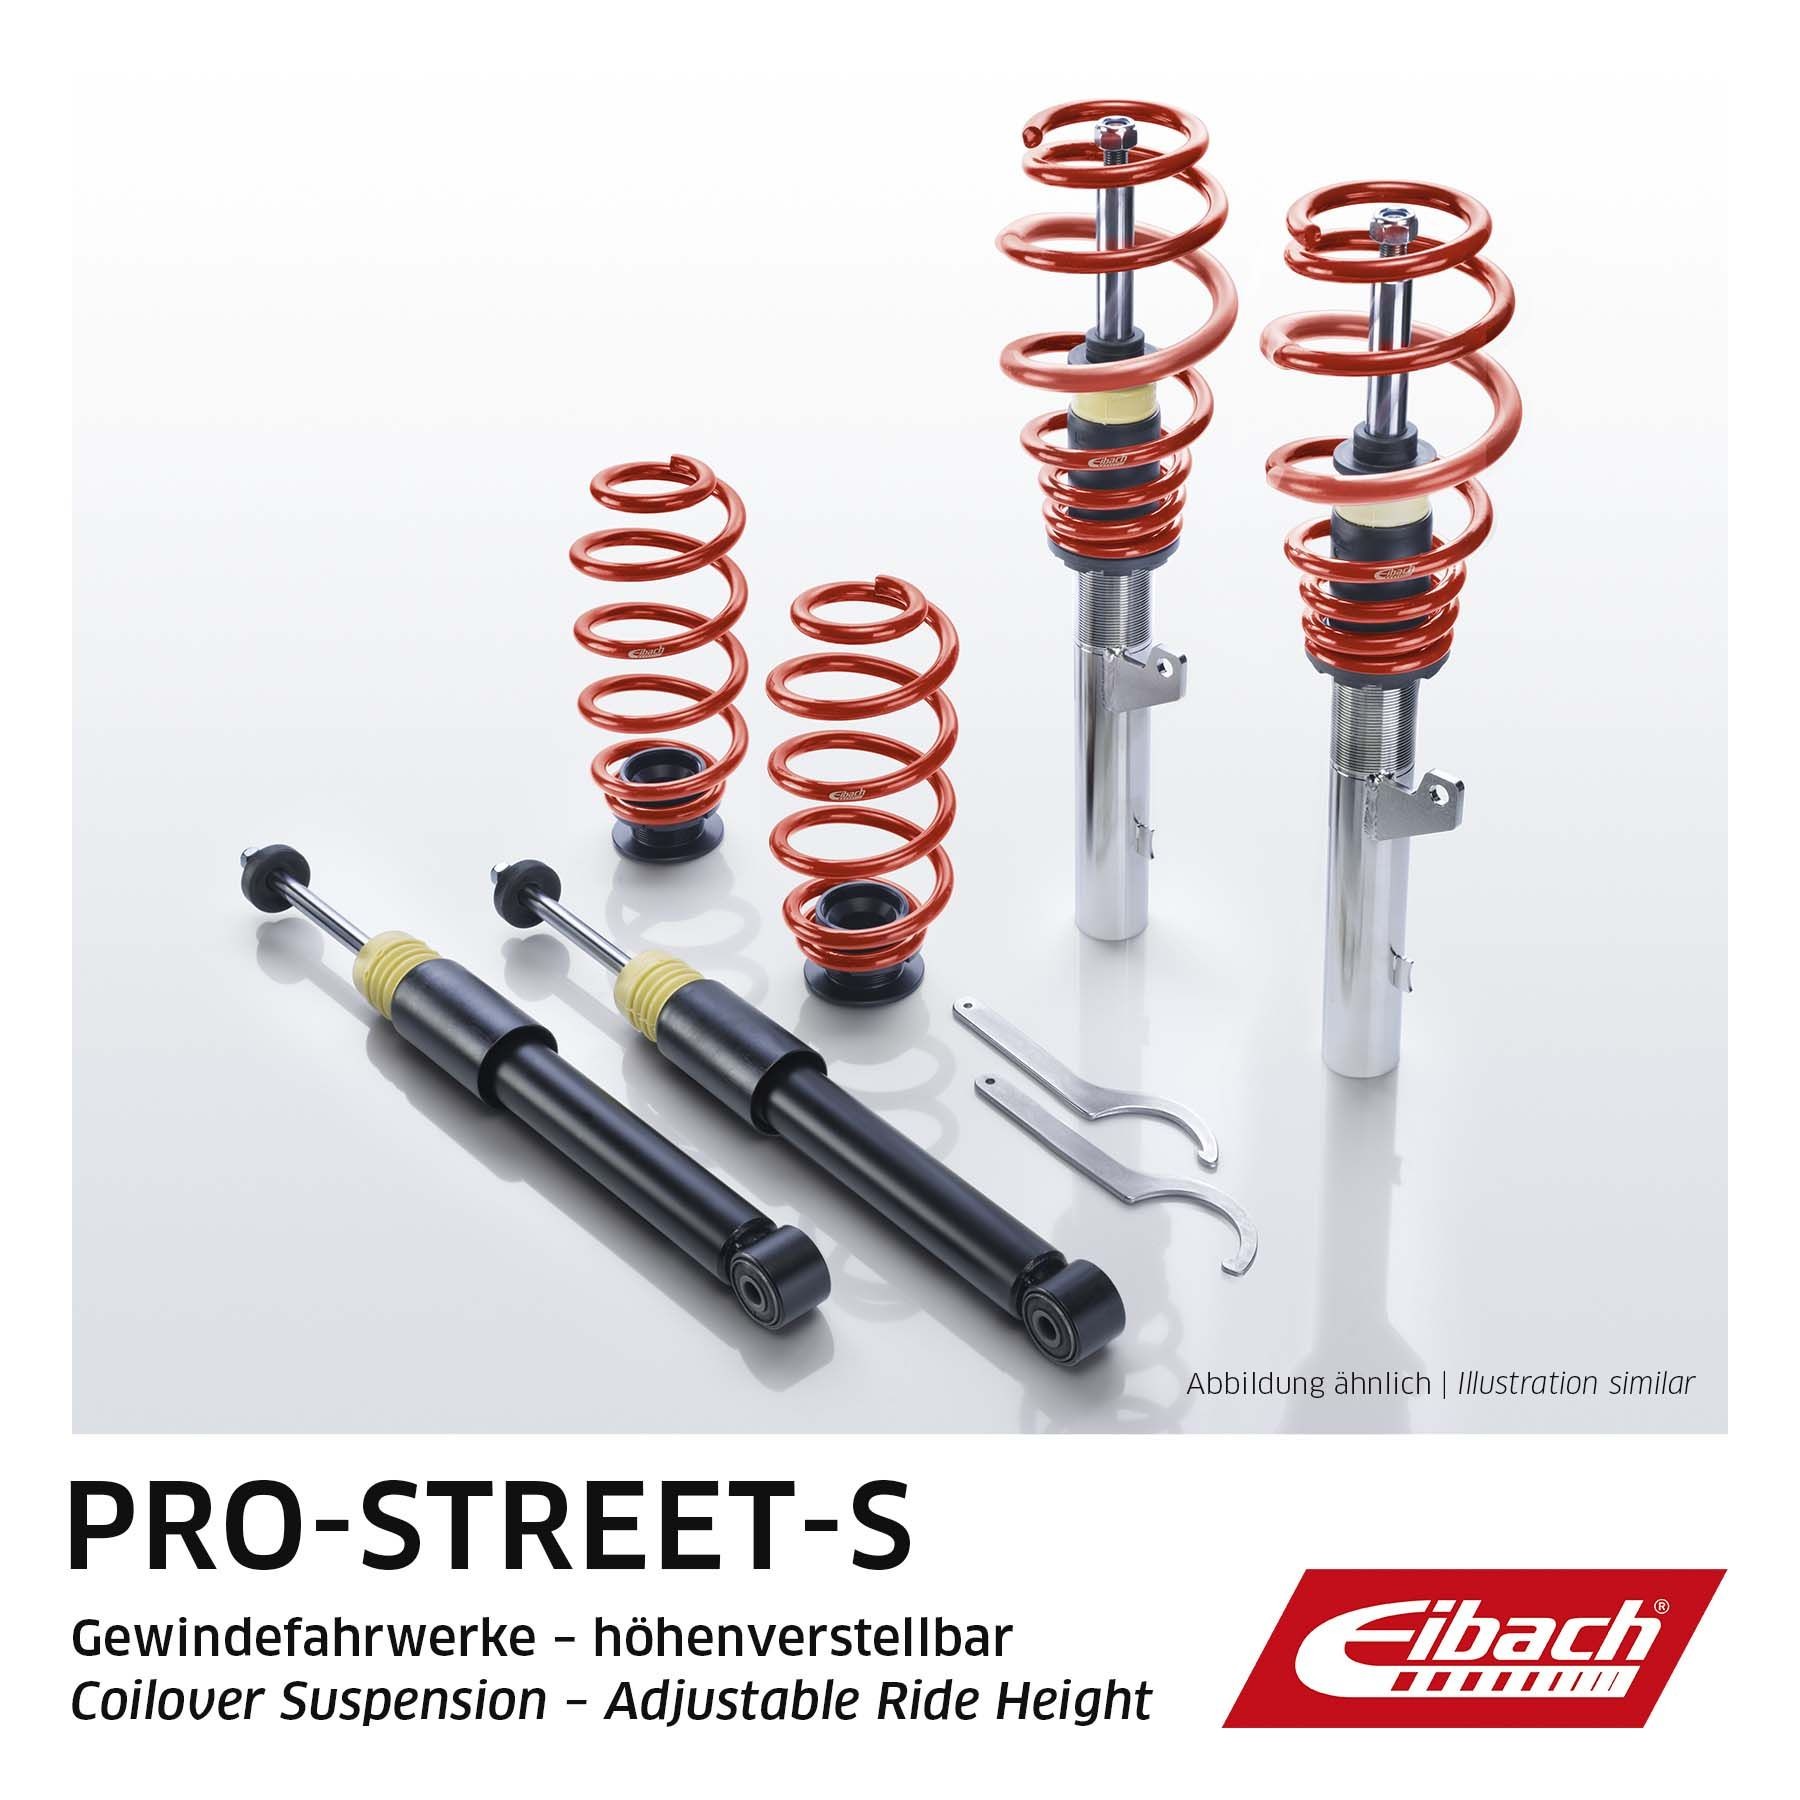 65200110122 EIBACH Pro-Street-S PSS65200110122 Suspension kit, coil springs / shock absorbers BMW E60 523 i 190 hp Petrol 2009 price